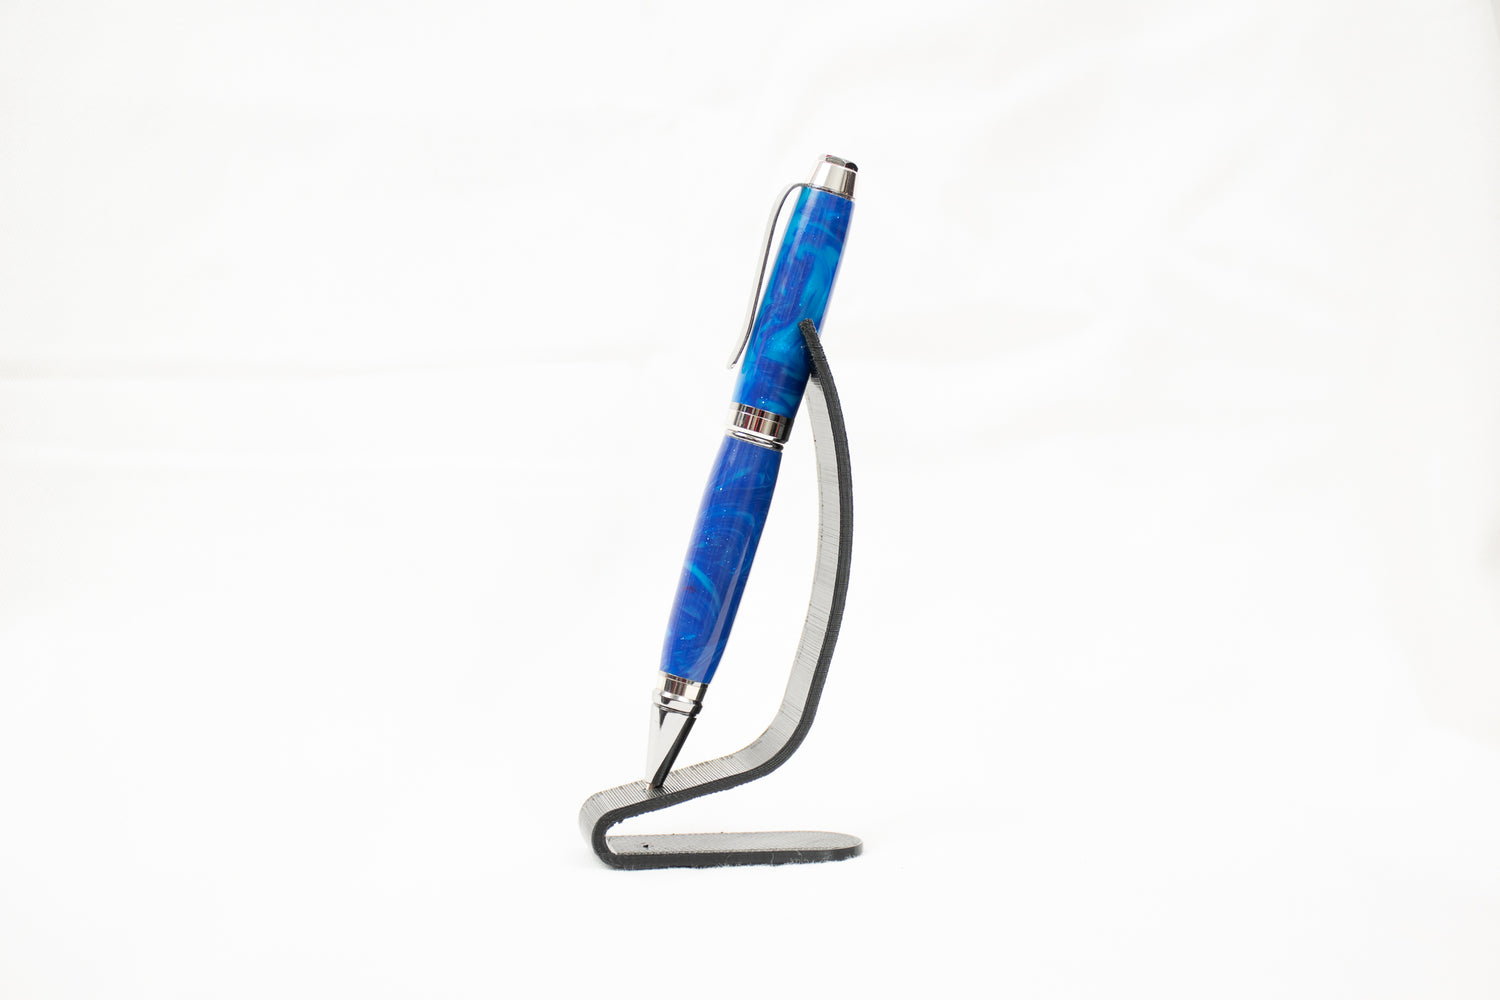 A handmade swirled blue cigar pen with chrome plating on a black stand